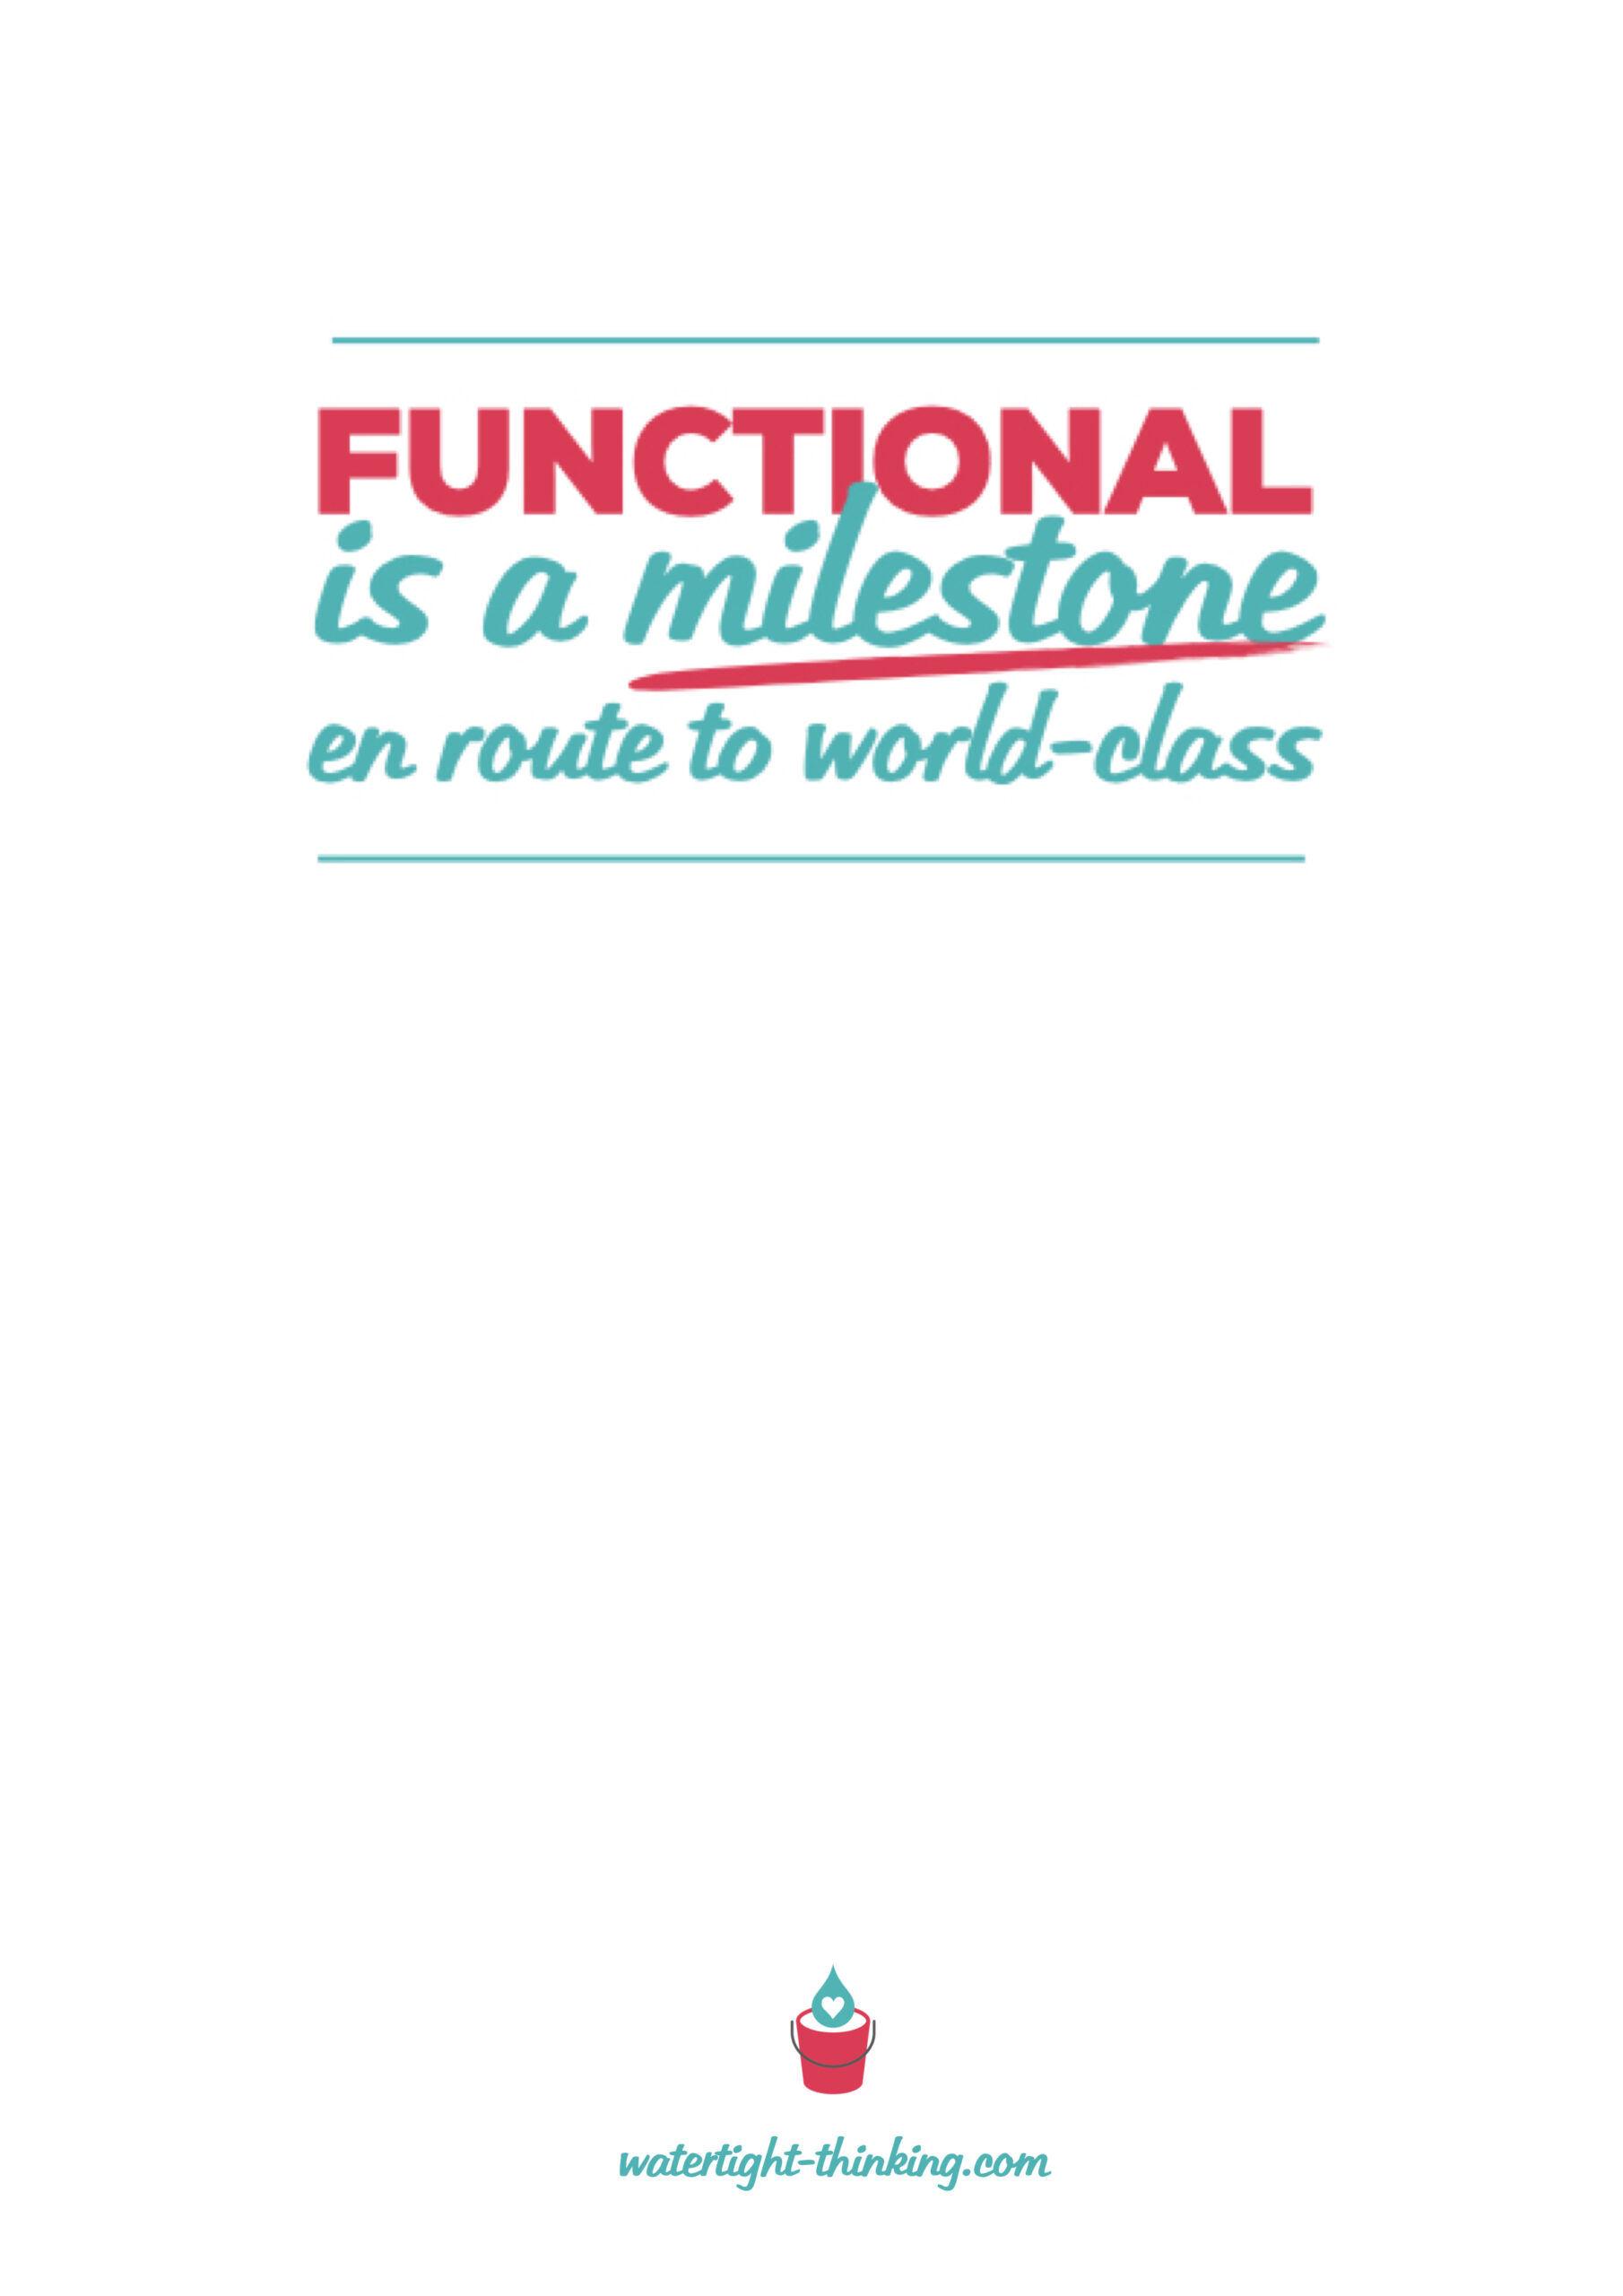 "Functional is a milestone en route to world class."